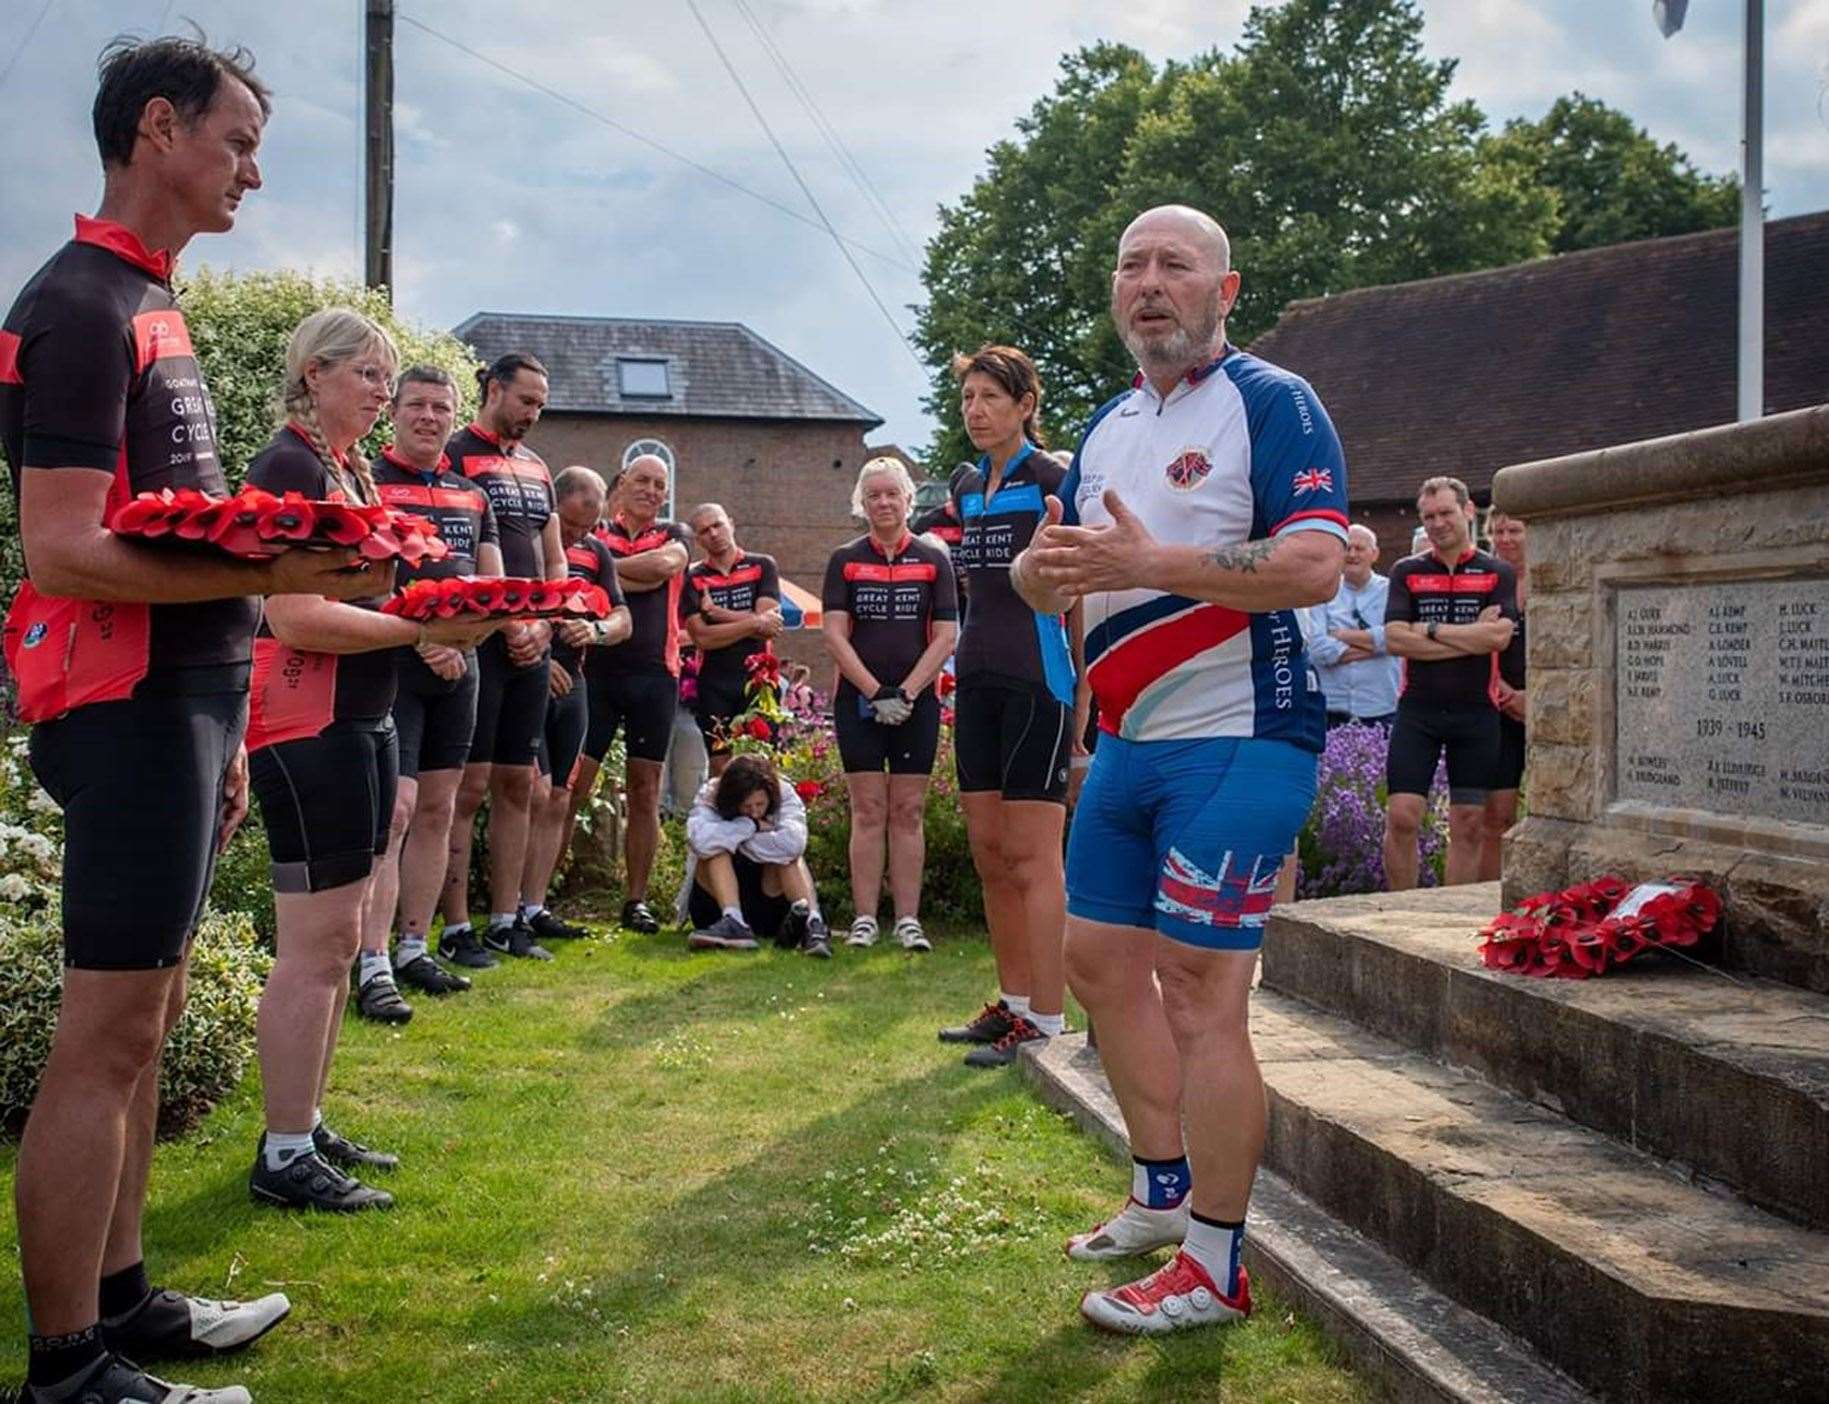 Army veteran Steve Craddock has organised and been involved in more than 50 cycle-based fundraising events (Steve Craddock/PA)